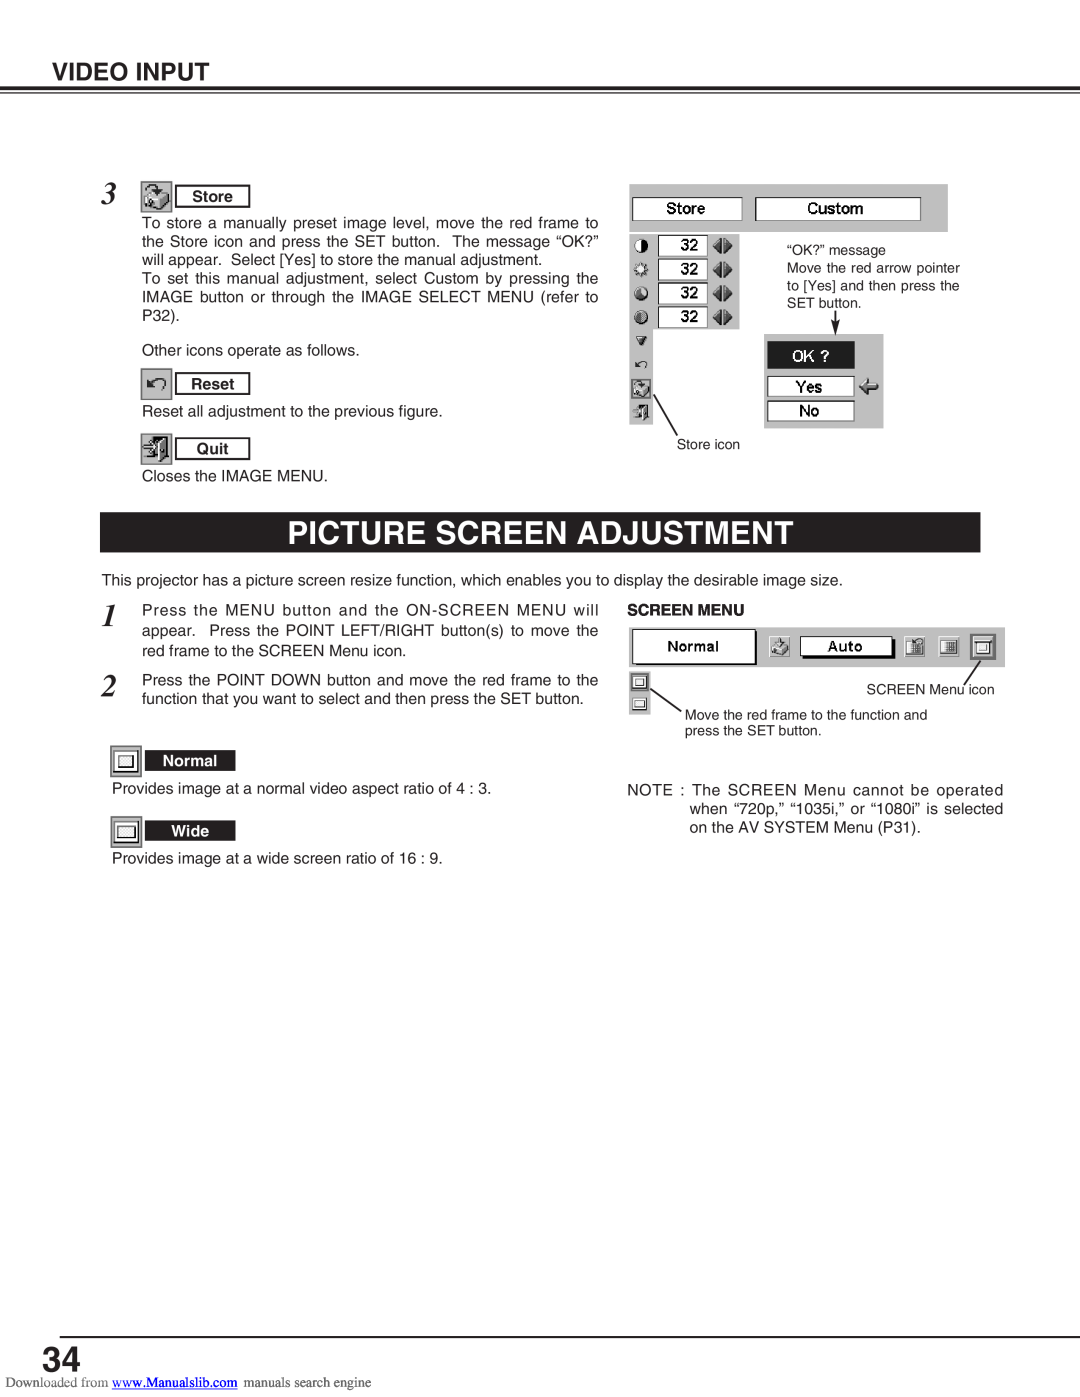 Canon LV-S2 owner manual Picture Screen Adjustment, Video Input, Store, Reset, Quit, Screen Menu 